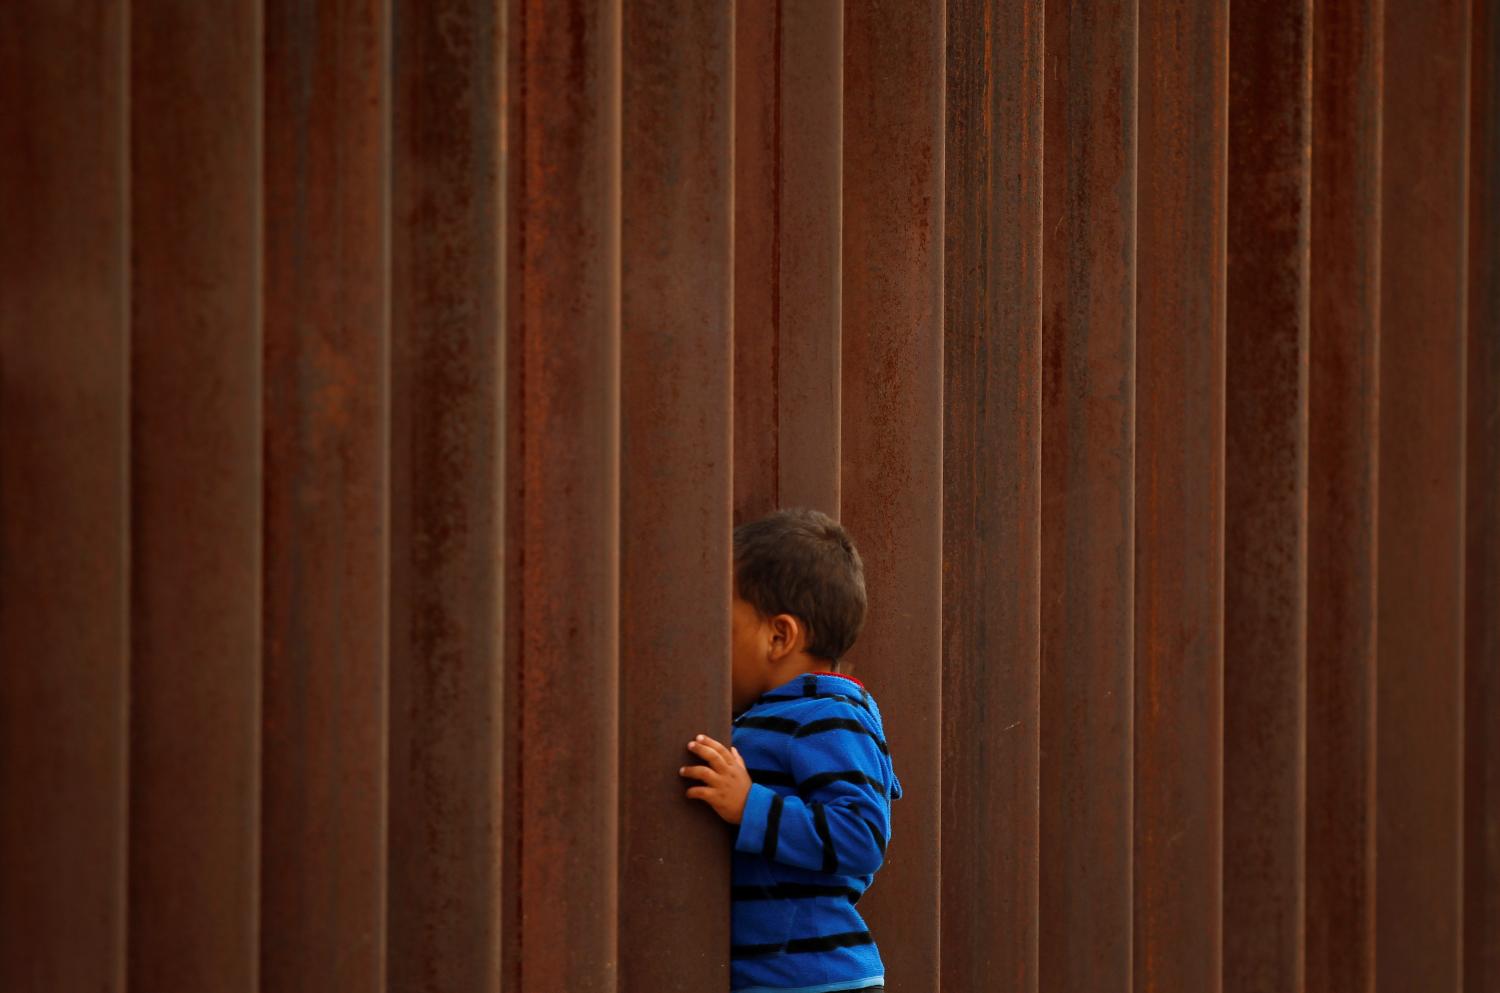 A child peeks through the border fence during the "Interfaith Service for Justice and Mercy at the Border" to demand the U.S. government to end the separation of immigrant children from their parents at the border, in Ciudad Juarez, Mexico September 7, 2018. REUTERS/Jose Luis Gonzalez - RC1410DF6D00